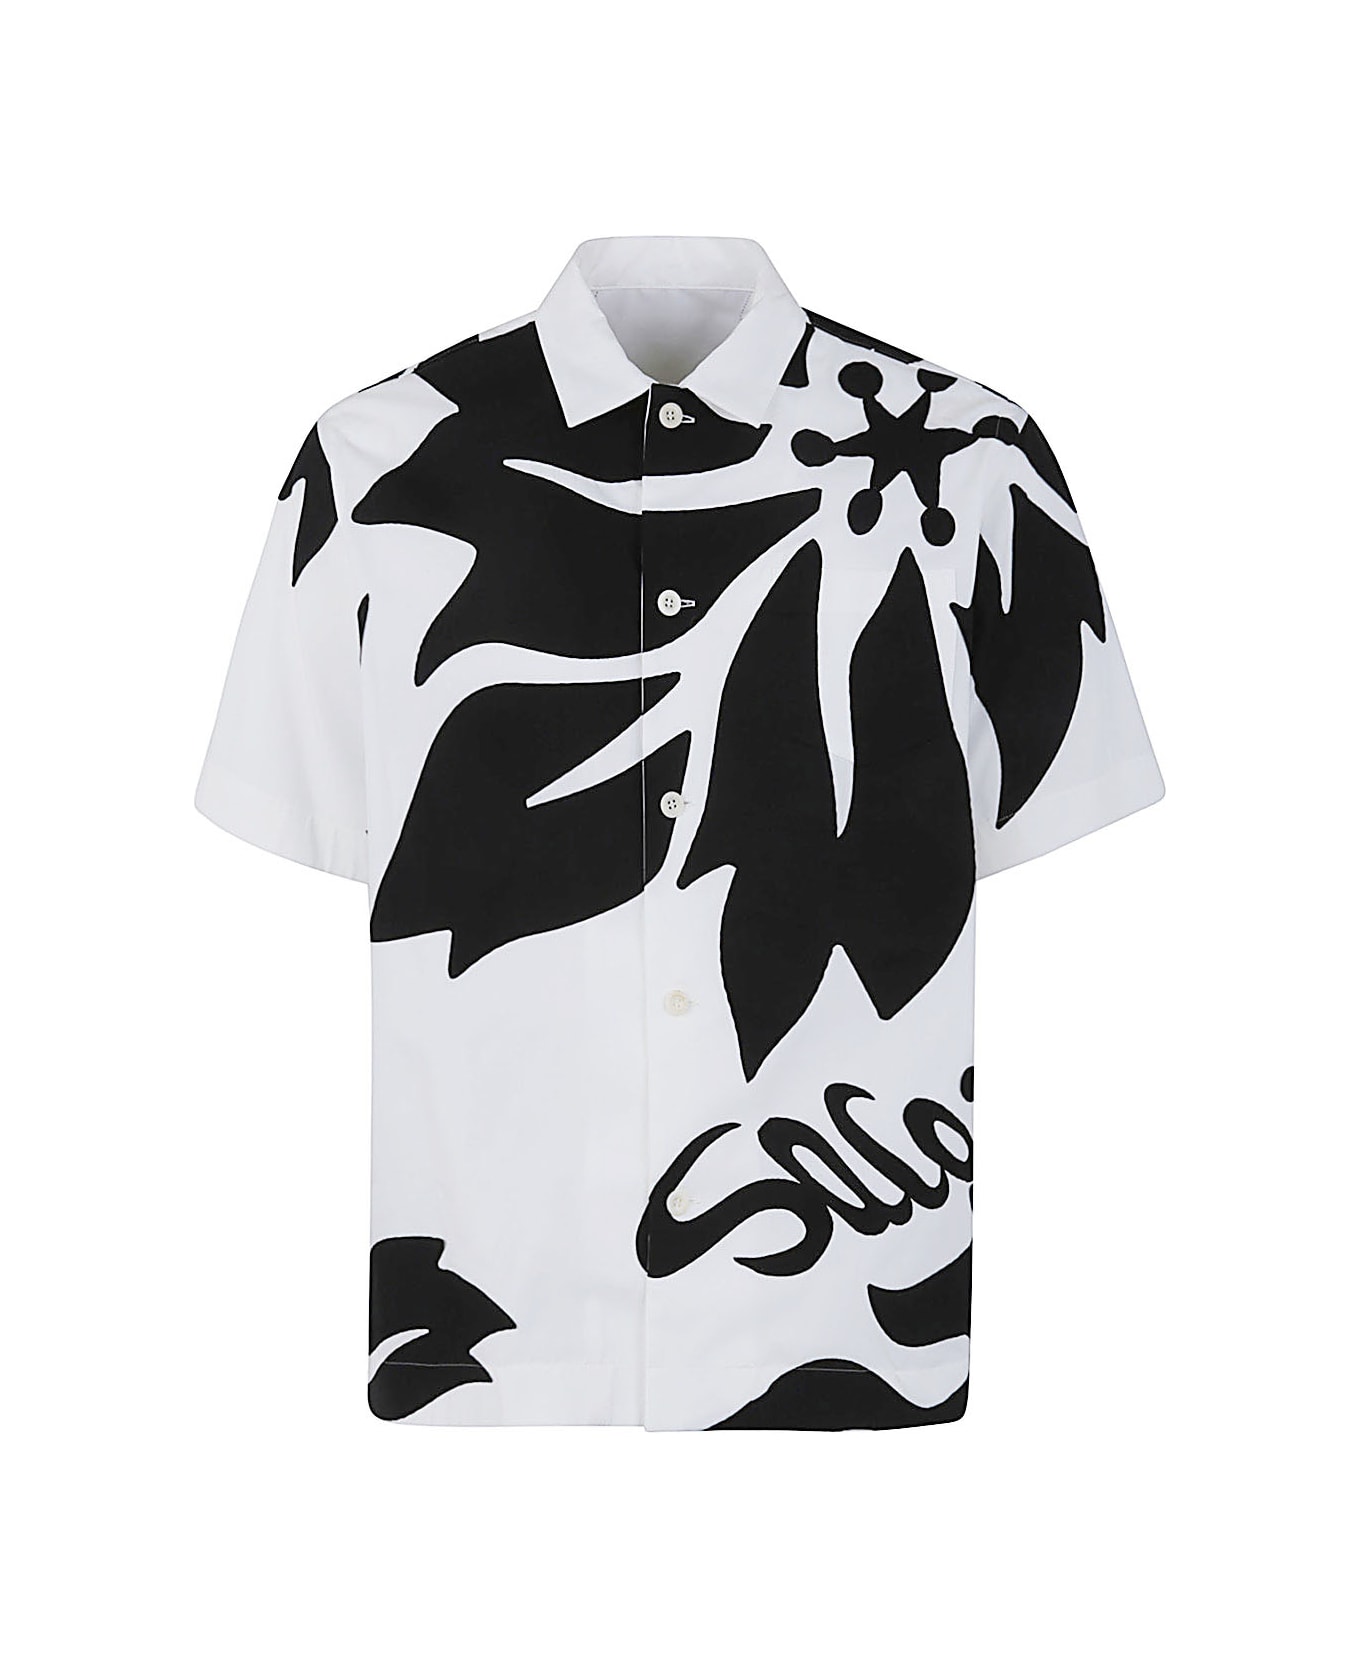 Sacai Floral Embroidered Patch Cotton Poplin Shirt - Off White Black シャツ